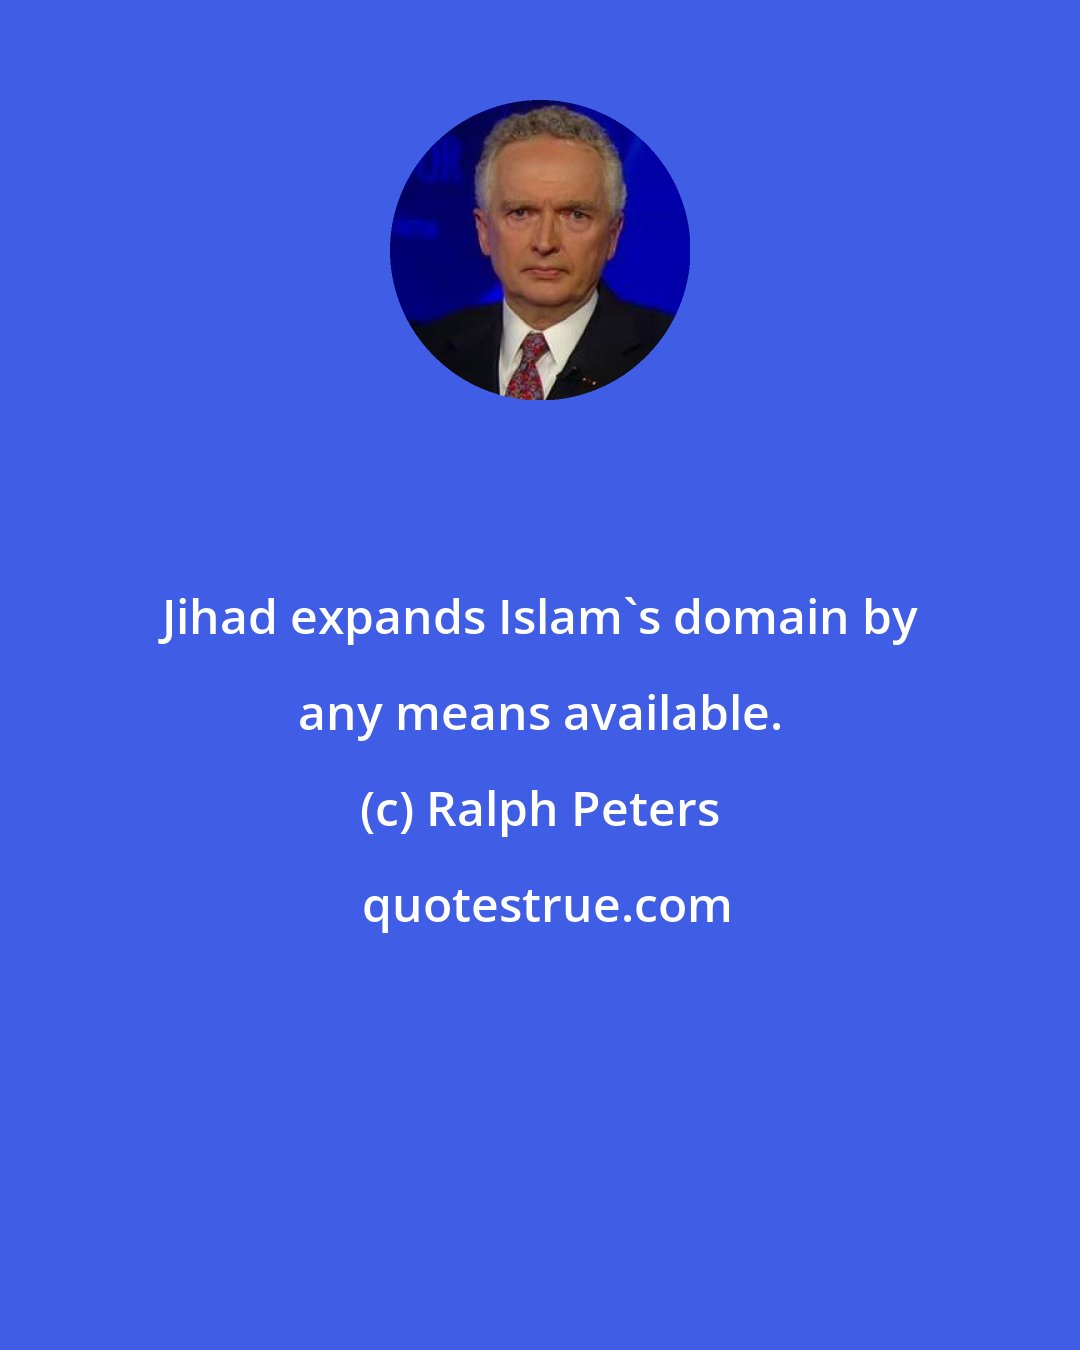 Ralph Peters: Jihad expands Islam's domain by any means available.